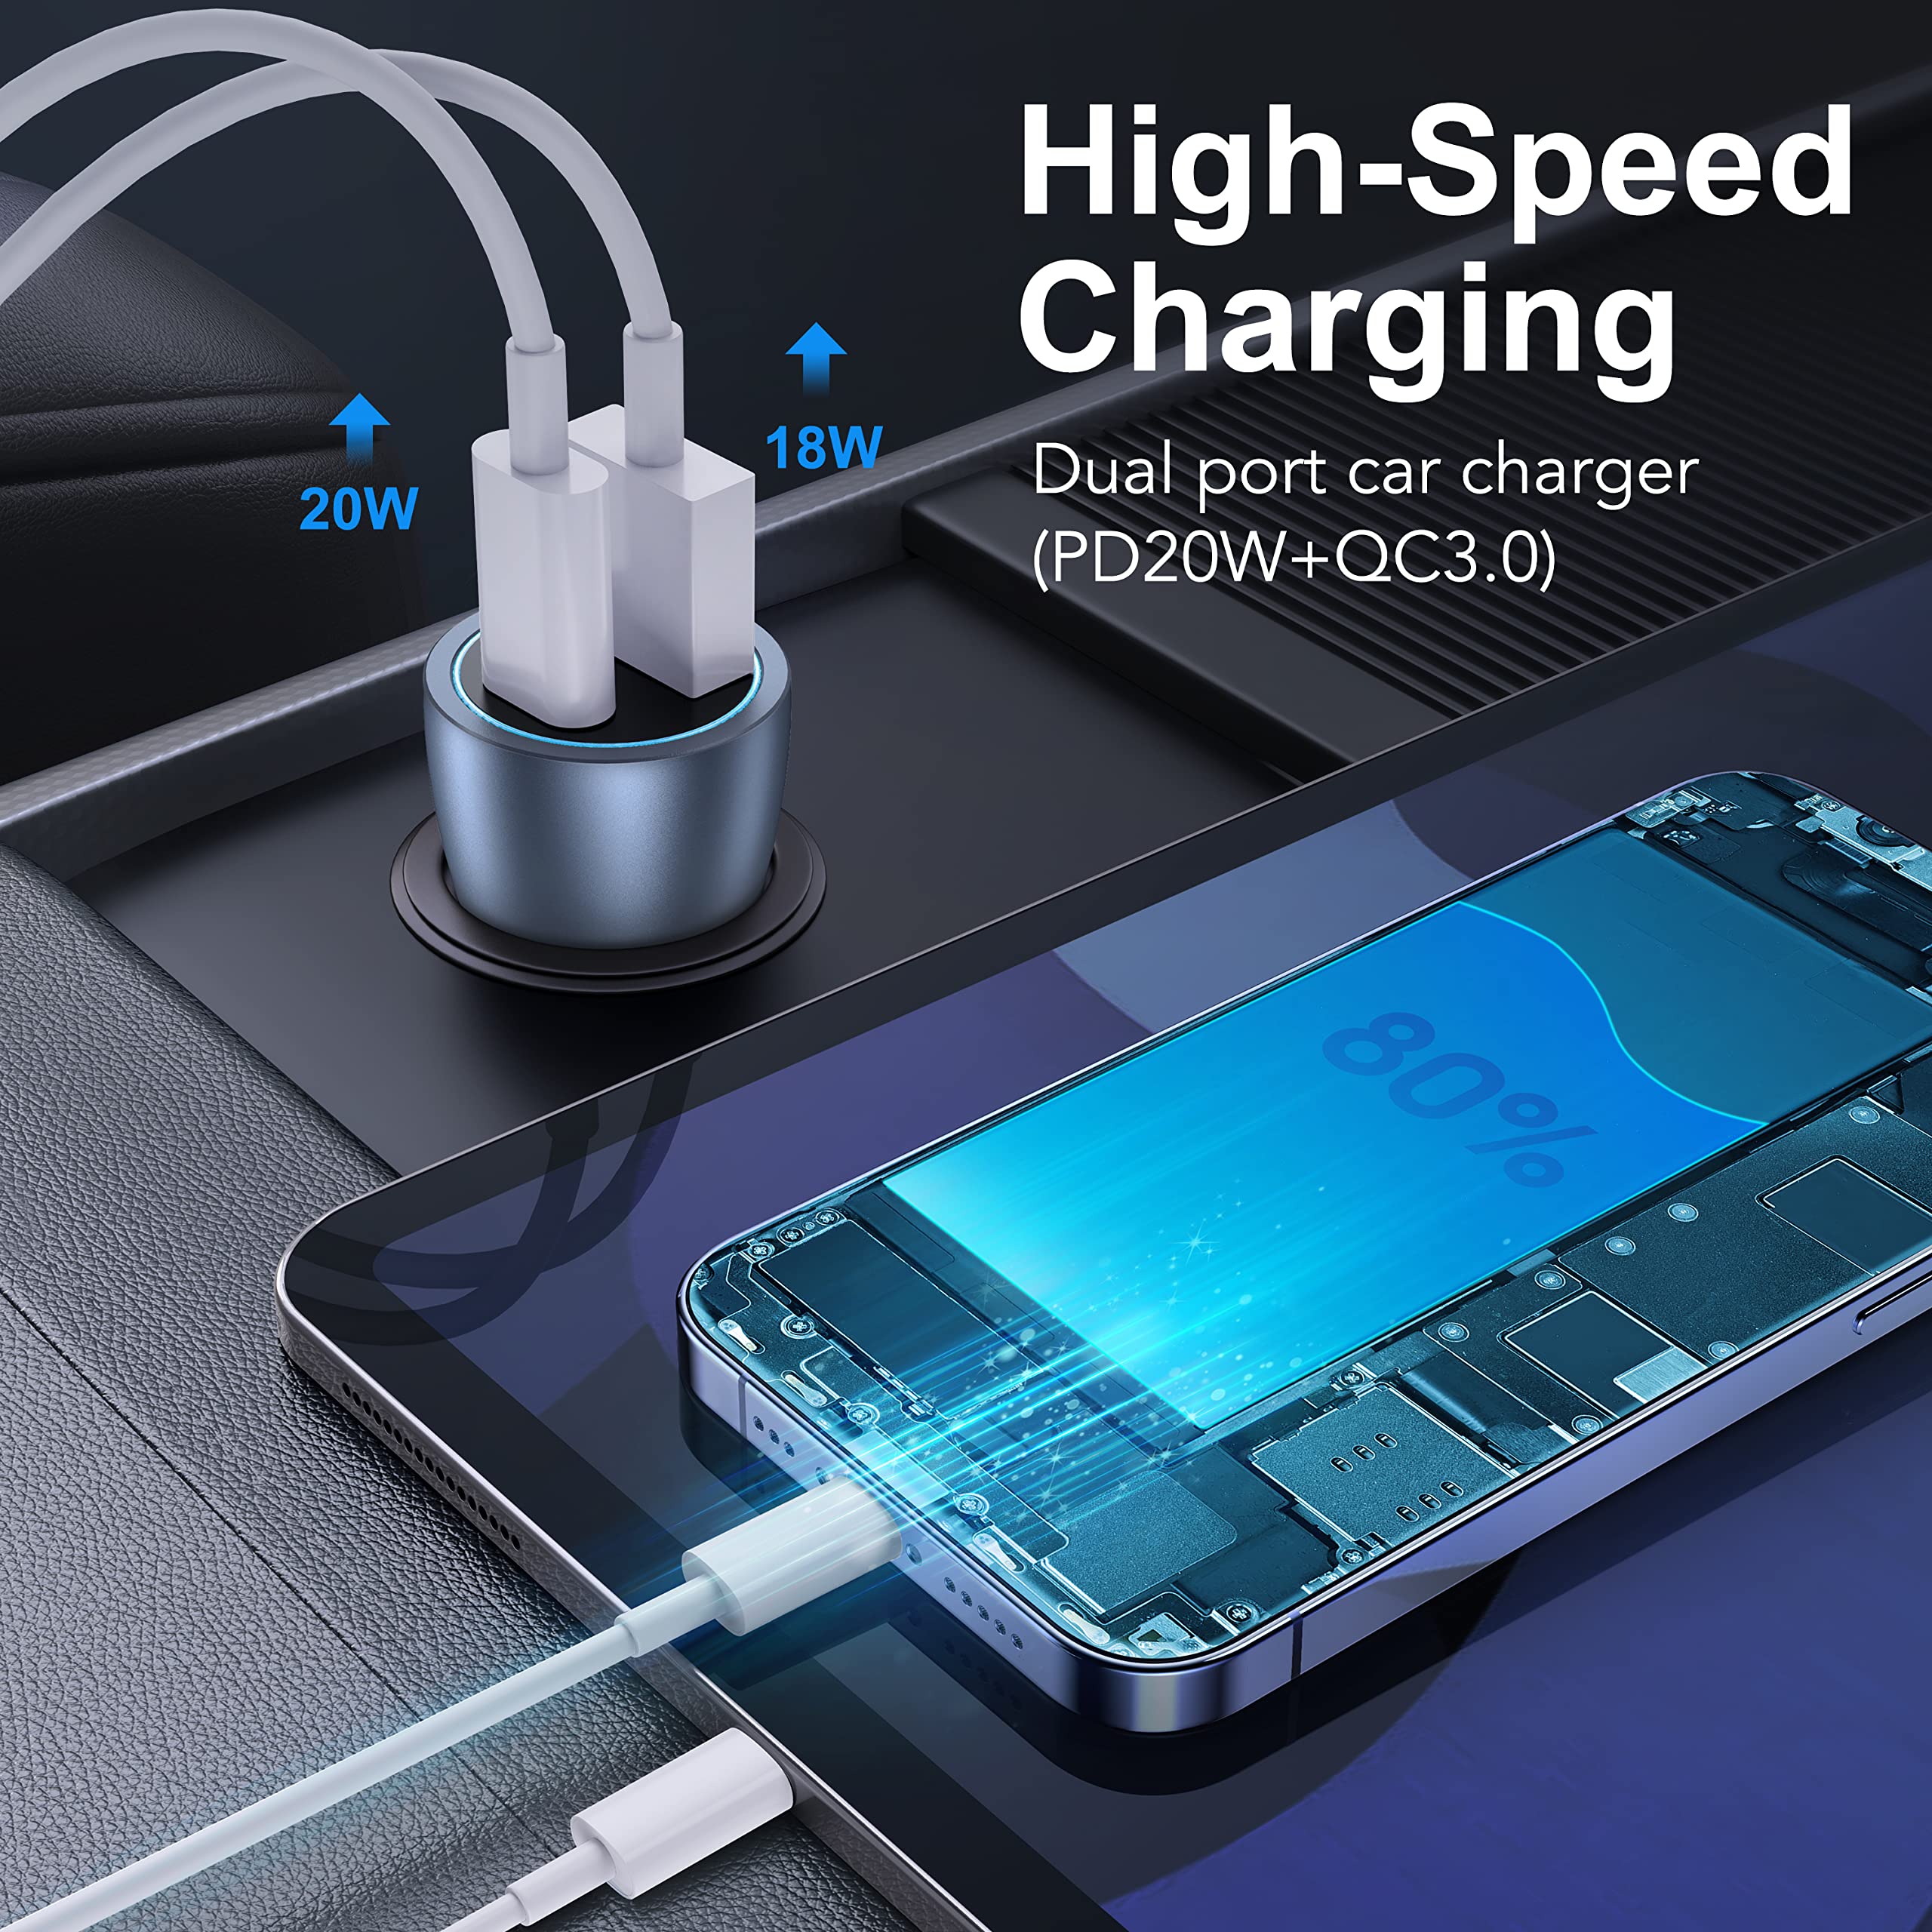 38W Car Charger Block Kit [MFi Certified] / PD 20W Type USB C Wall Charger Fast Charging Power Delivery Adapter with 2 Pcs 6.6FT Charging Cable for iPhone 13 12 11 14 Pro Max Plus Xs Max XR X iPad